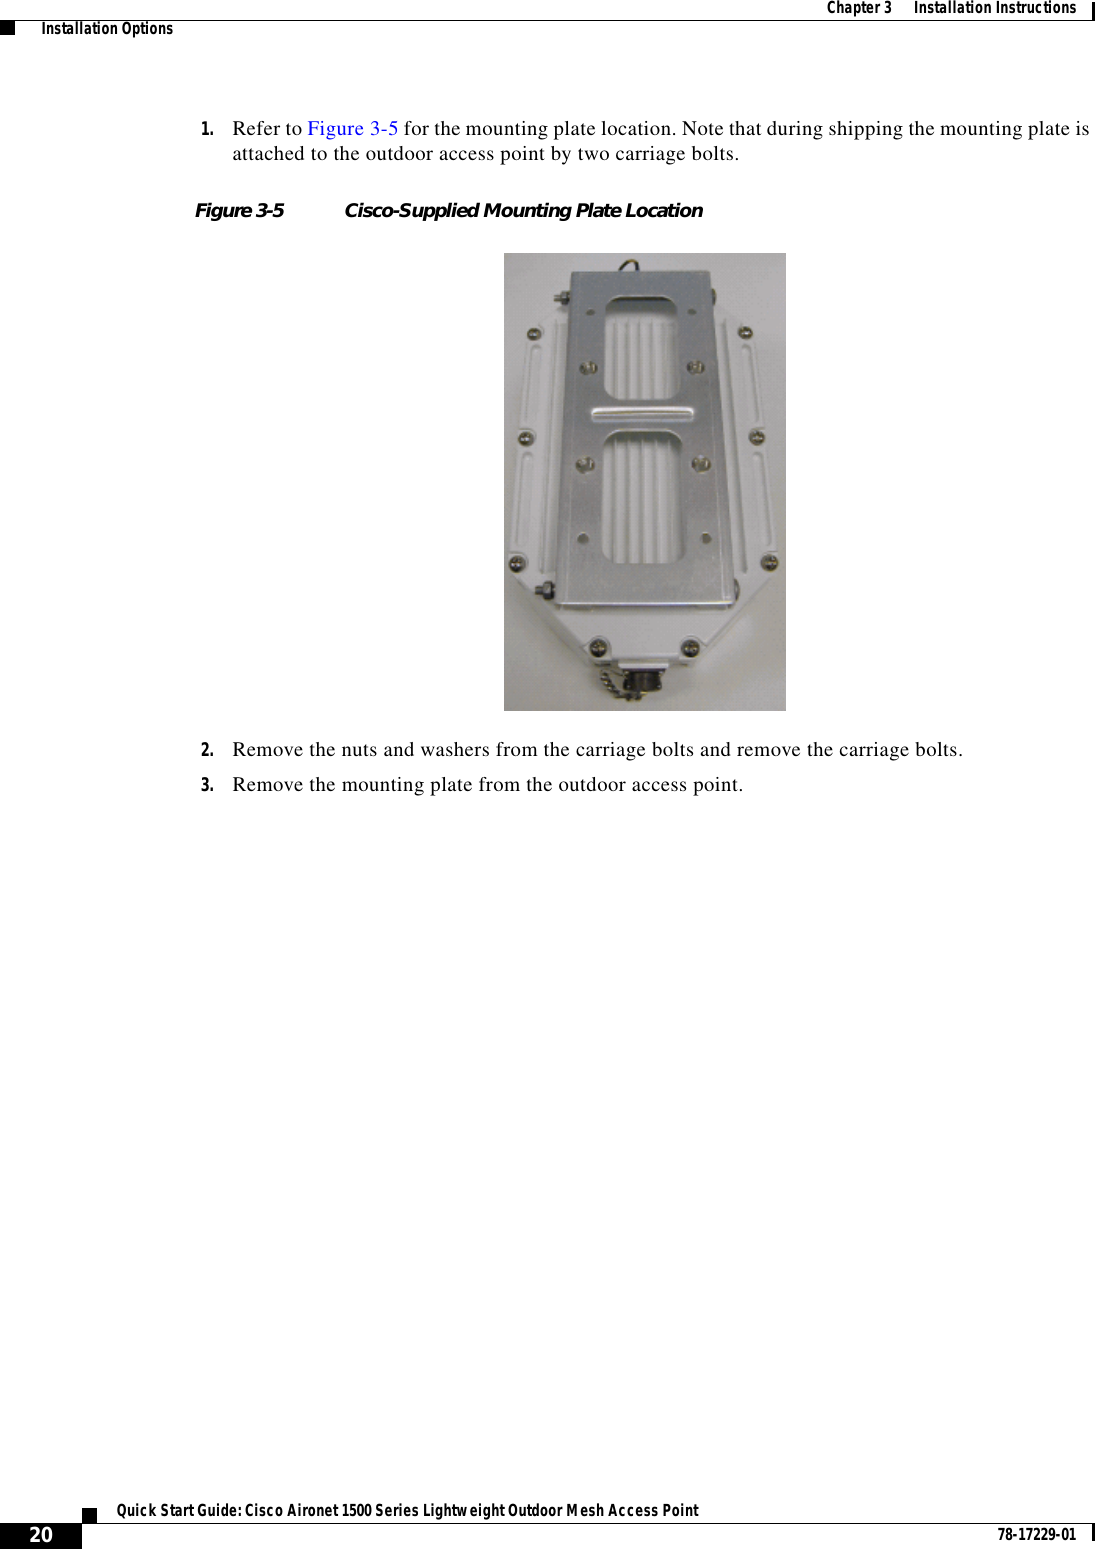  20Quick Start Guide: Cisco Aironet 1500 Series Lightweight Outdoor Mesh Access Point 78-17229-01Chapter 3      Installation Instructions  Installation Options1. Refer to Figure 3-5 for the mounting plate location. Note that during shipping the mounting plate is attached to the outdoor access point by two carriage bolts.Figure 3-5 Cisco-Supplied Mounting Plate Location2. Remove the nuts and washers from the carriage bolts and remove the carriage bolts.3. Remove the mounting plate from the outdoor access point.